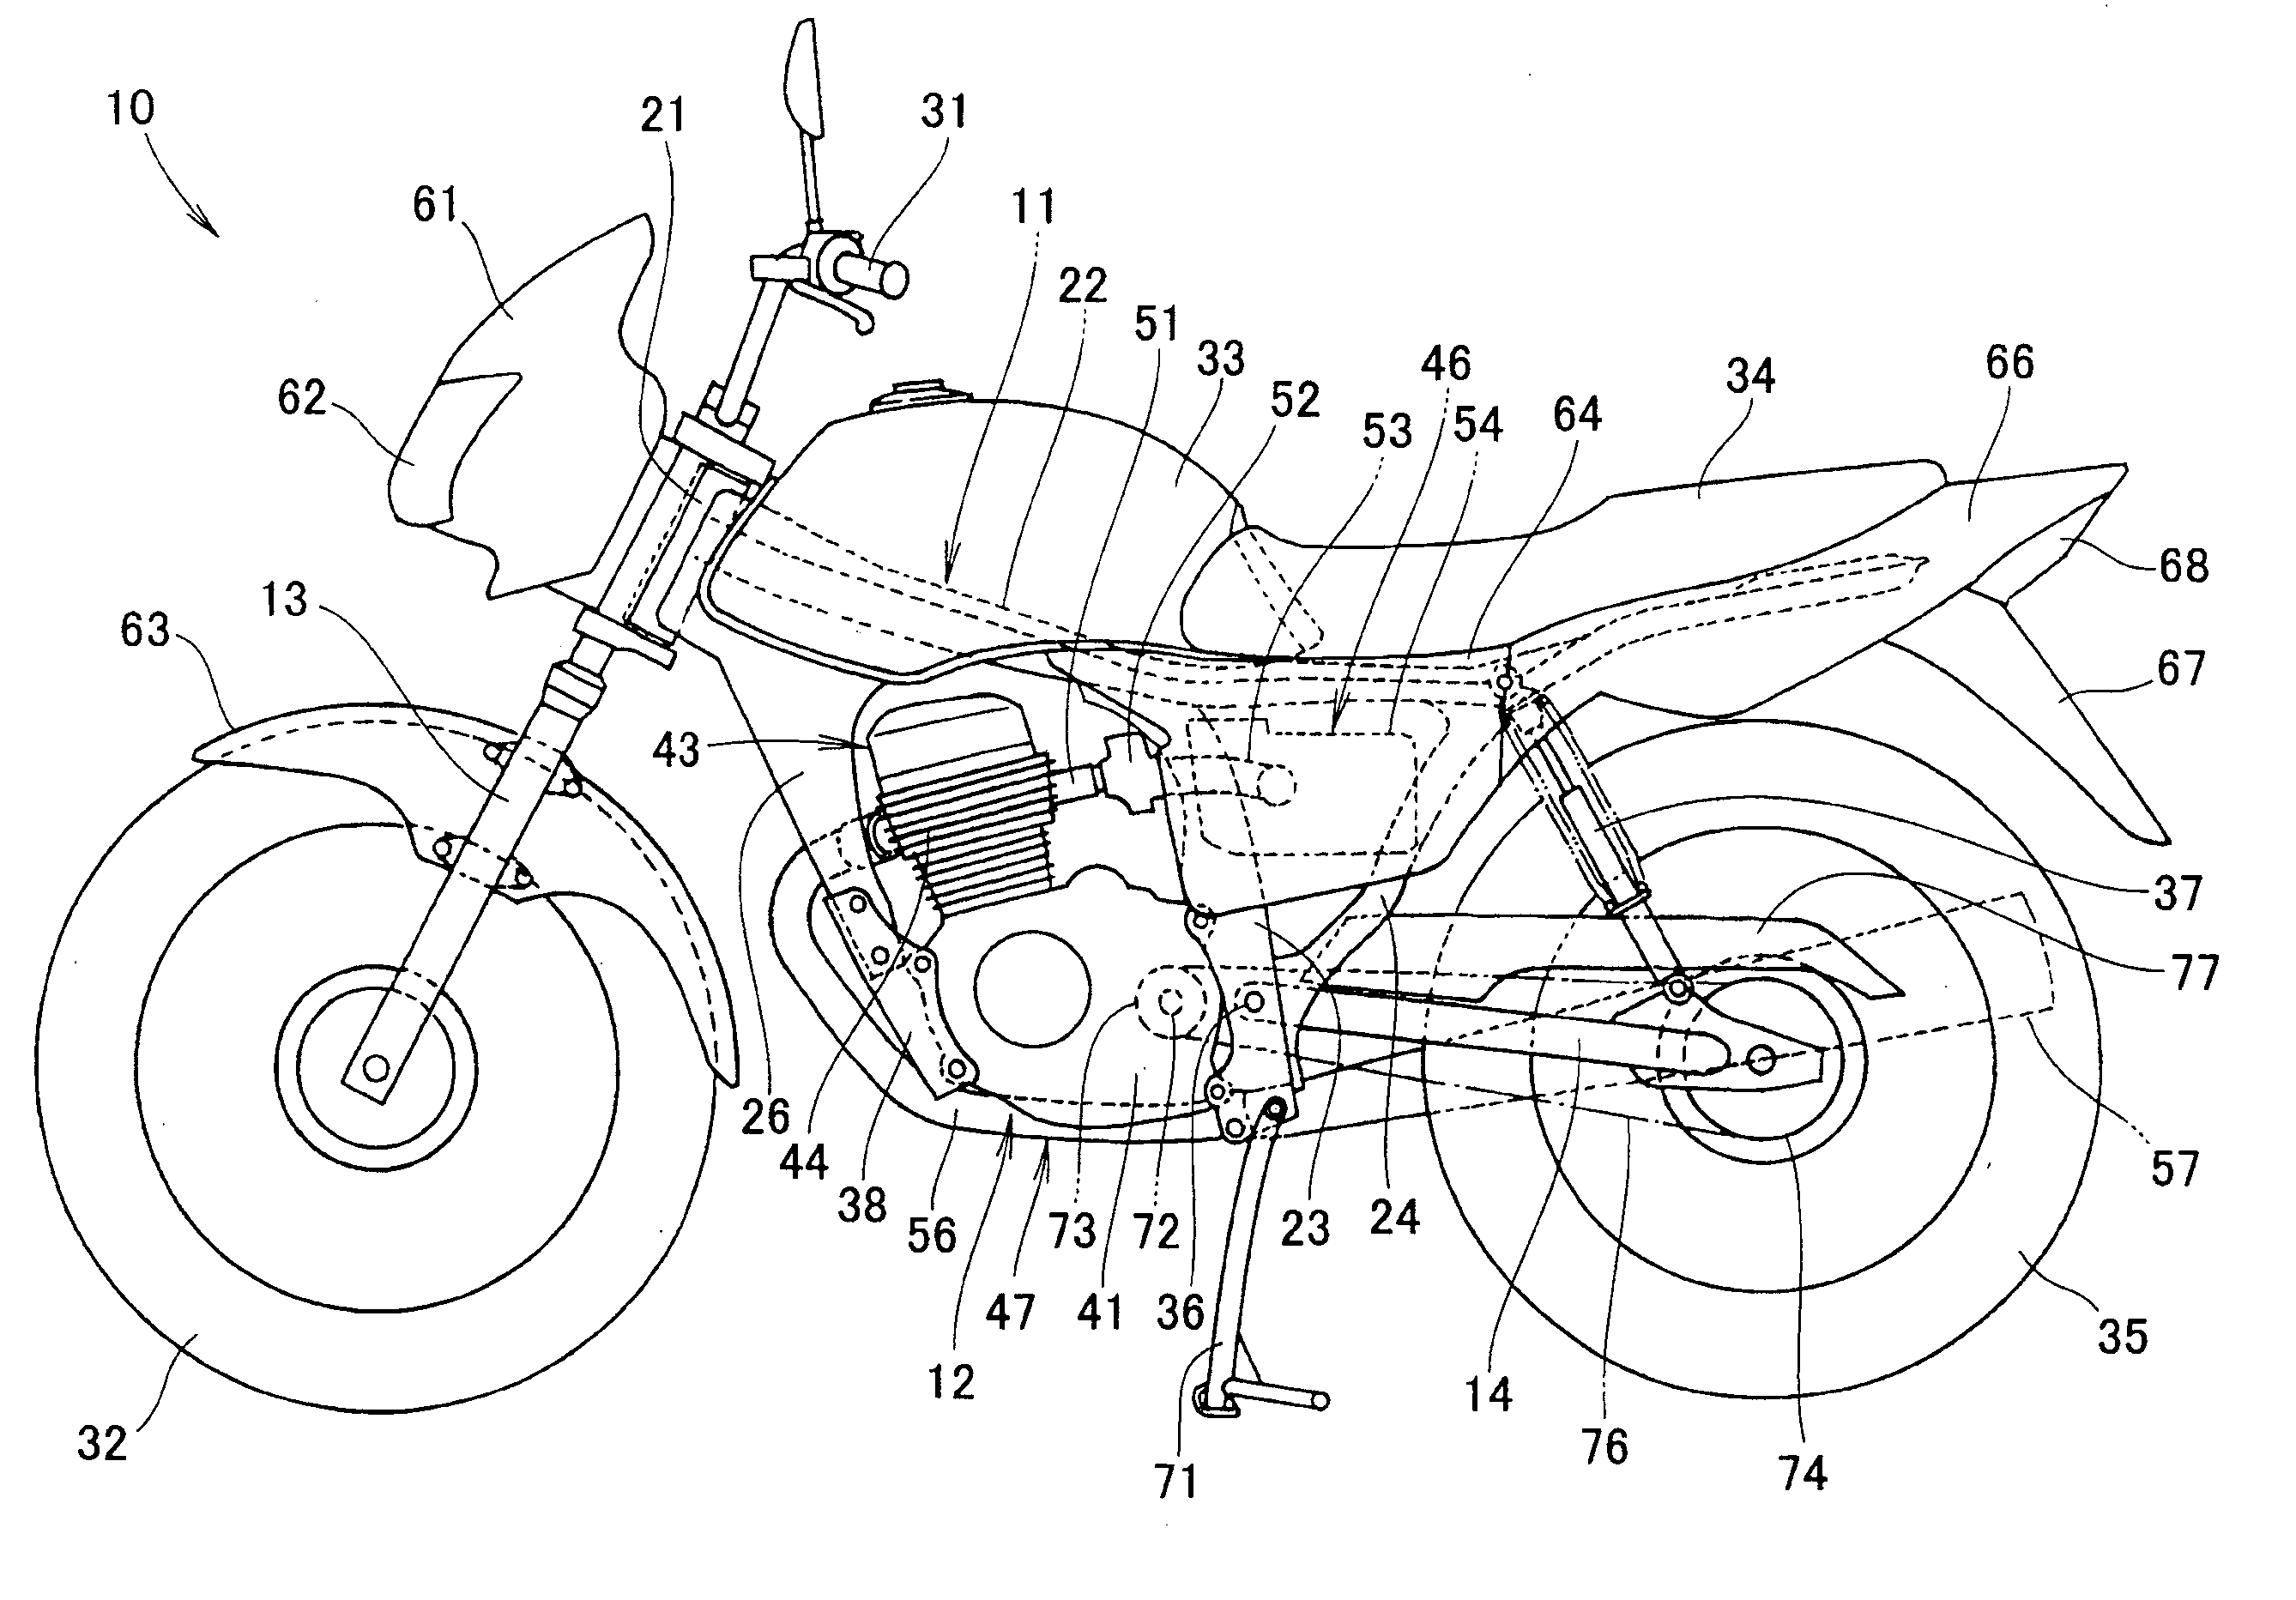 Vehicle fuel supply device and fuel filter structure